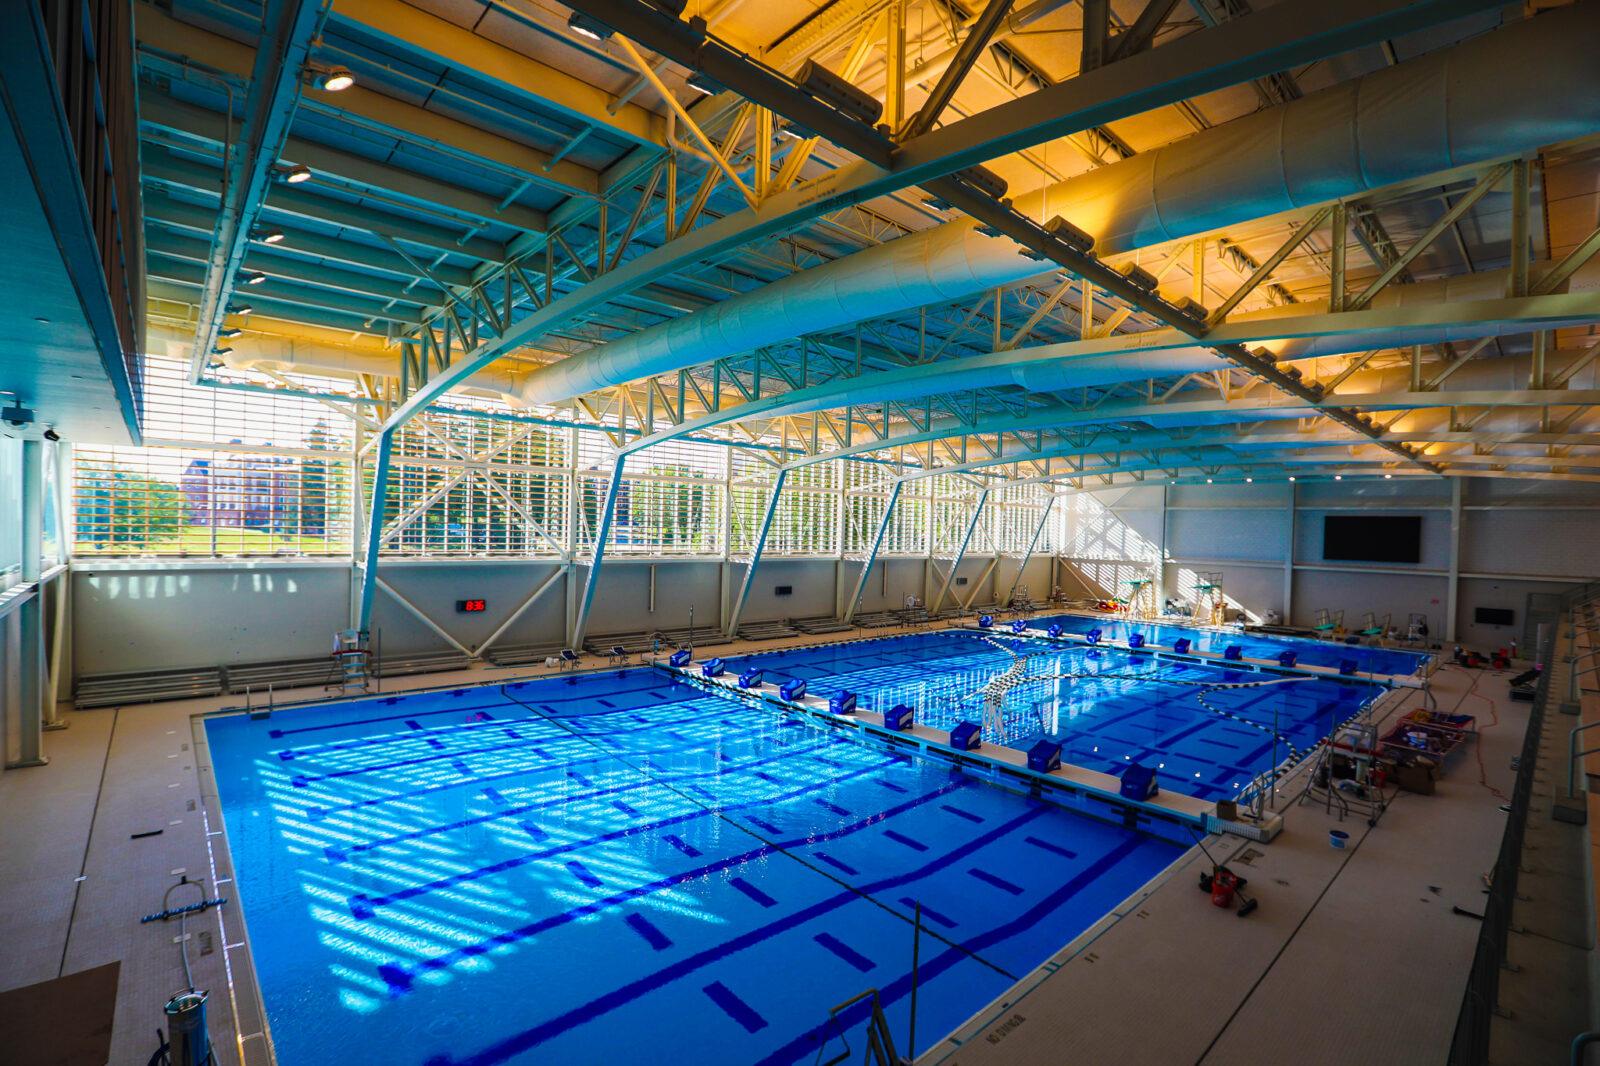 Aerial view of the indoor swimming pool in the Colby Athletic Center